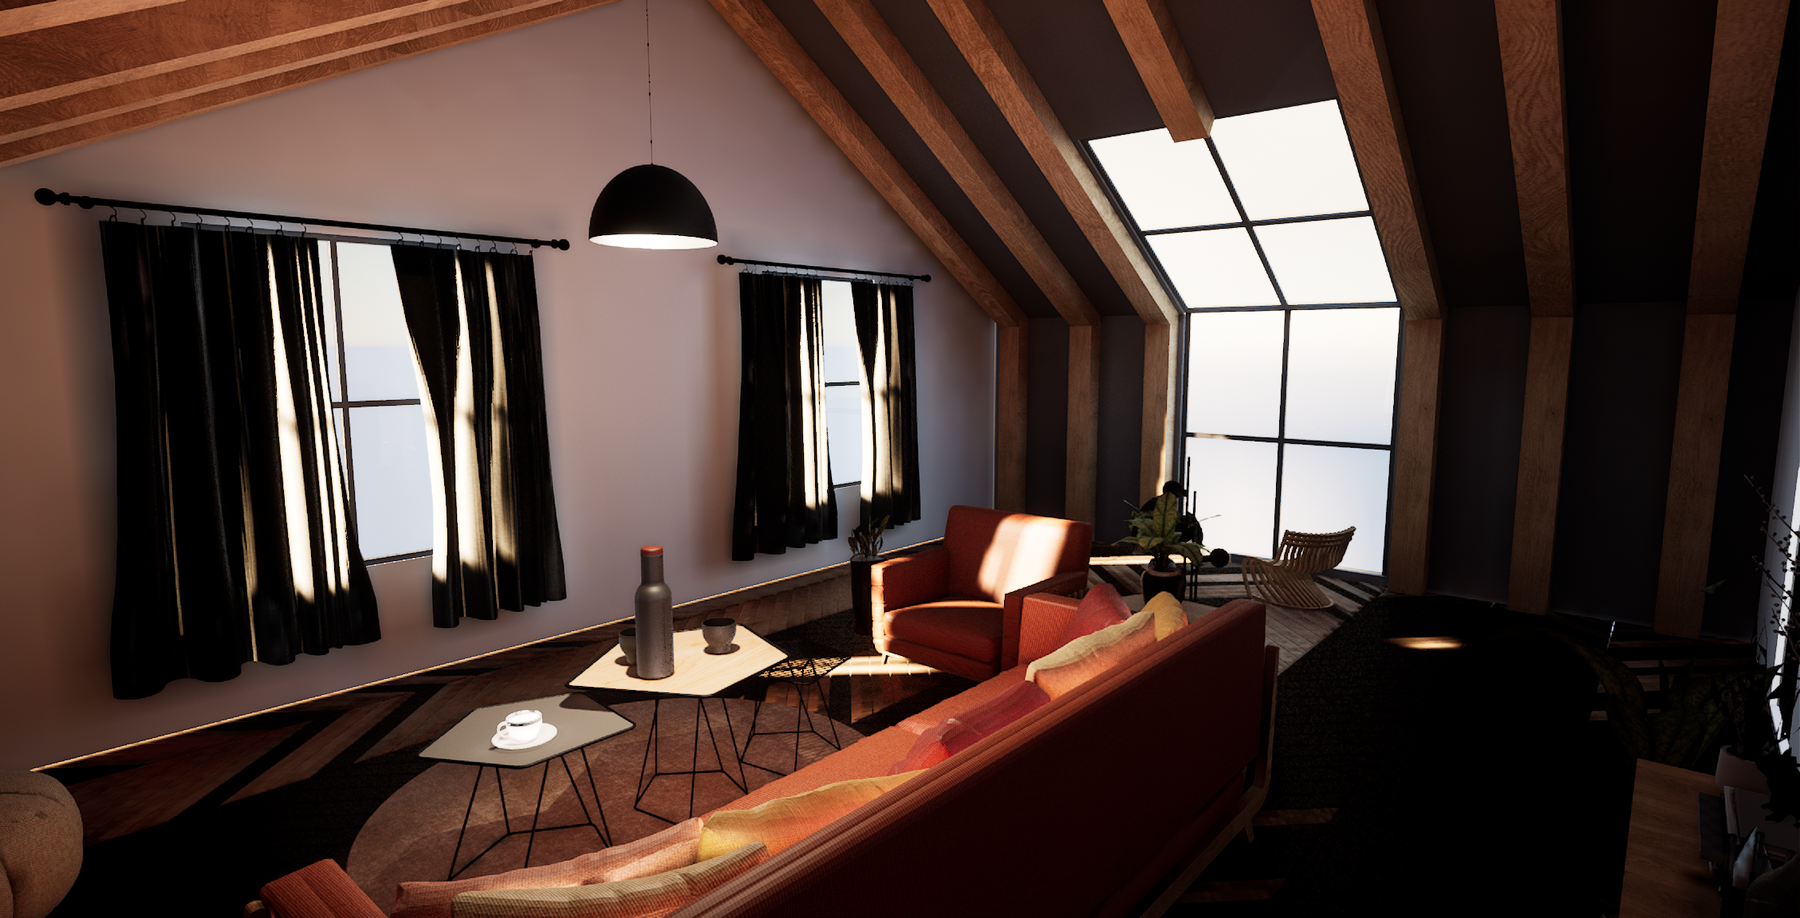 UE4 Cozy Living Room image1.png